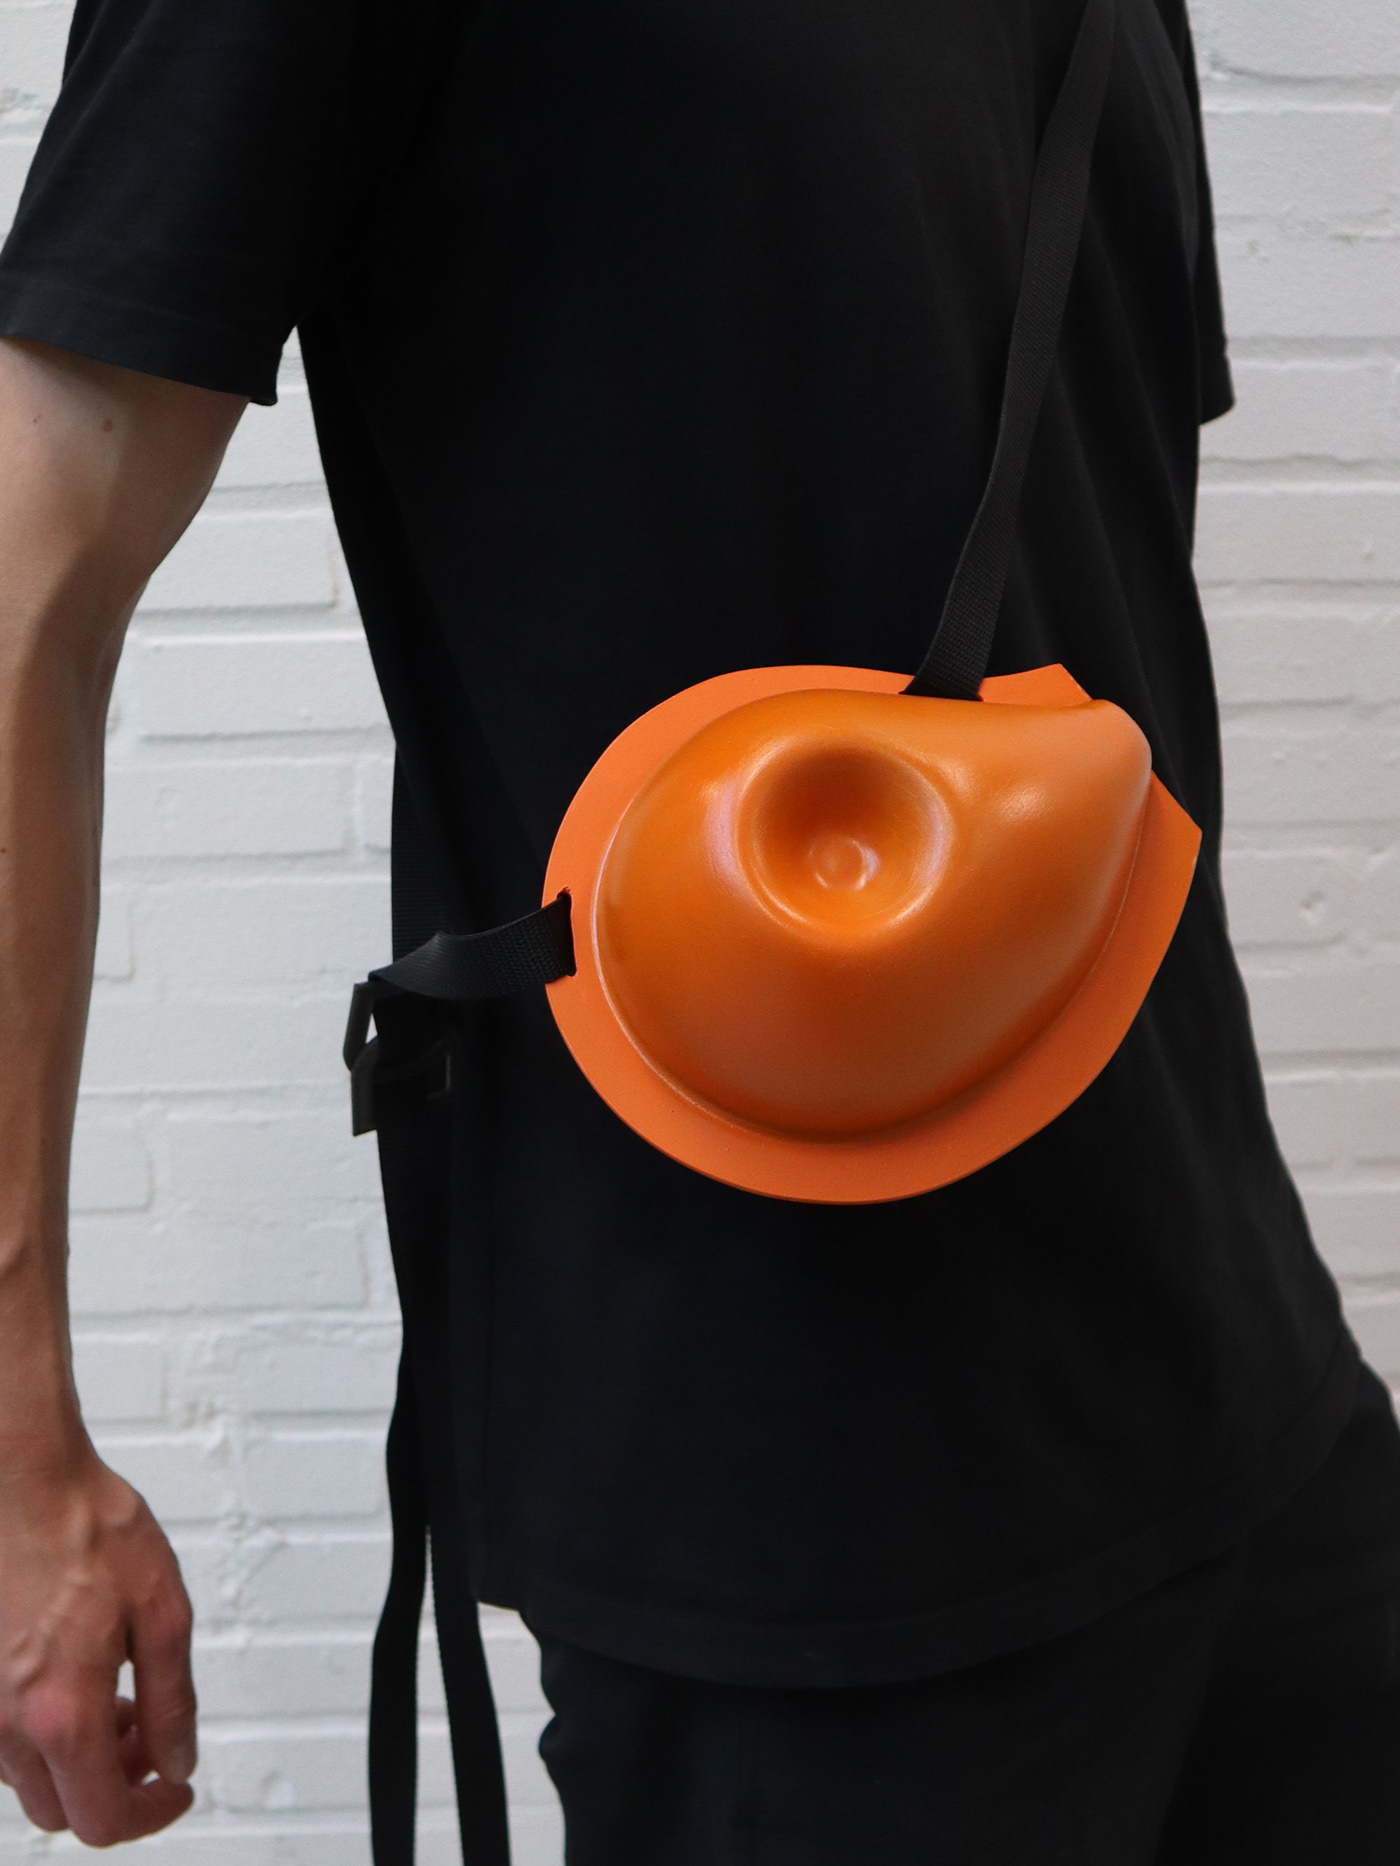 A watering can with an adjustable strap for wearing the object around the body.